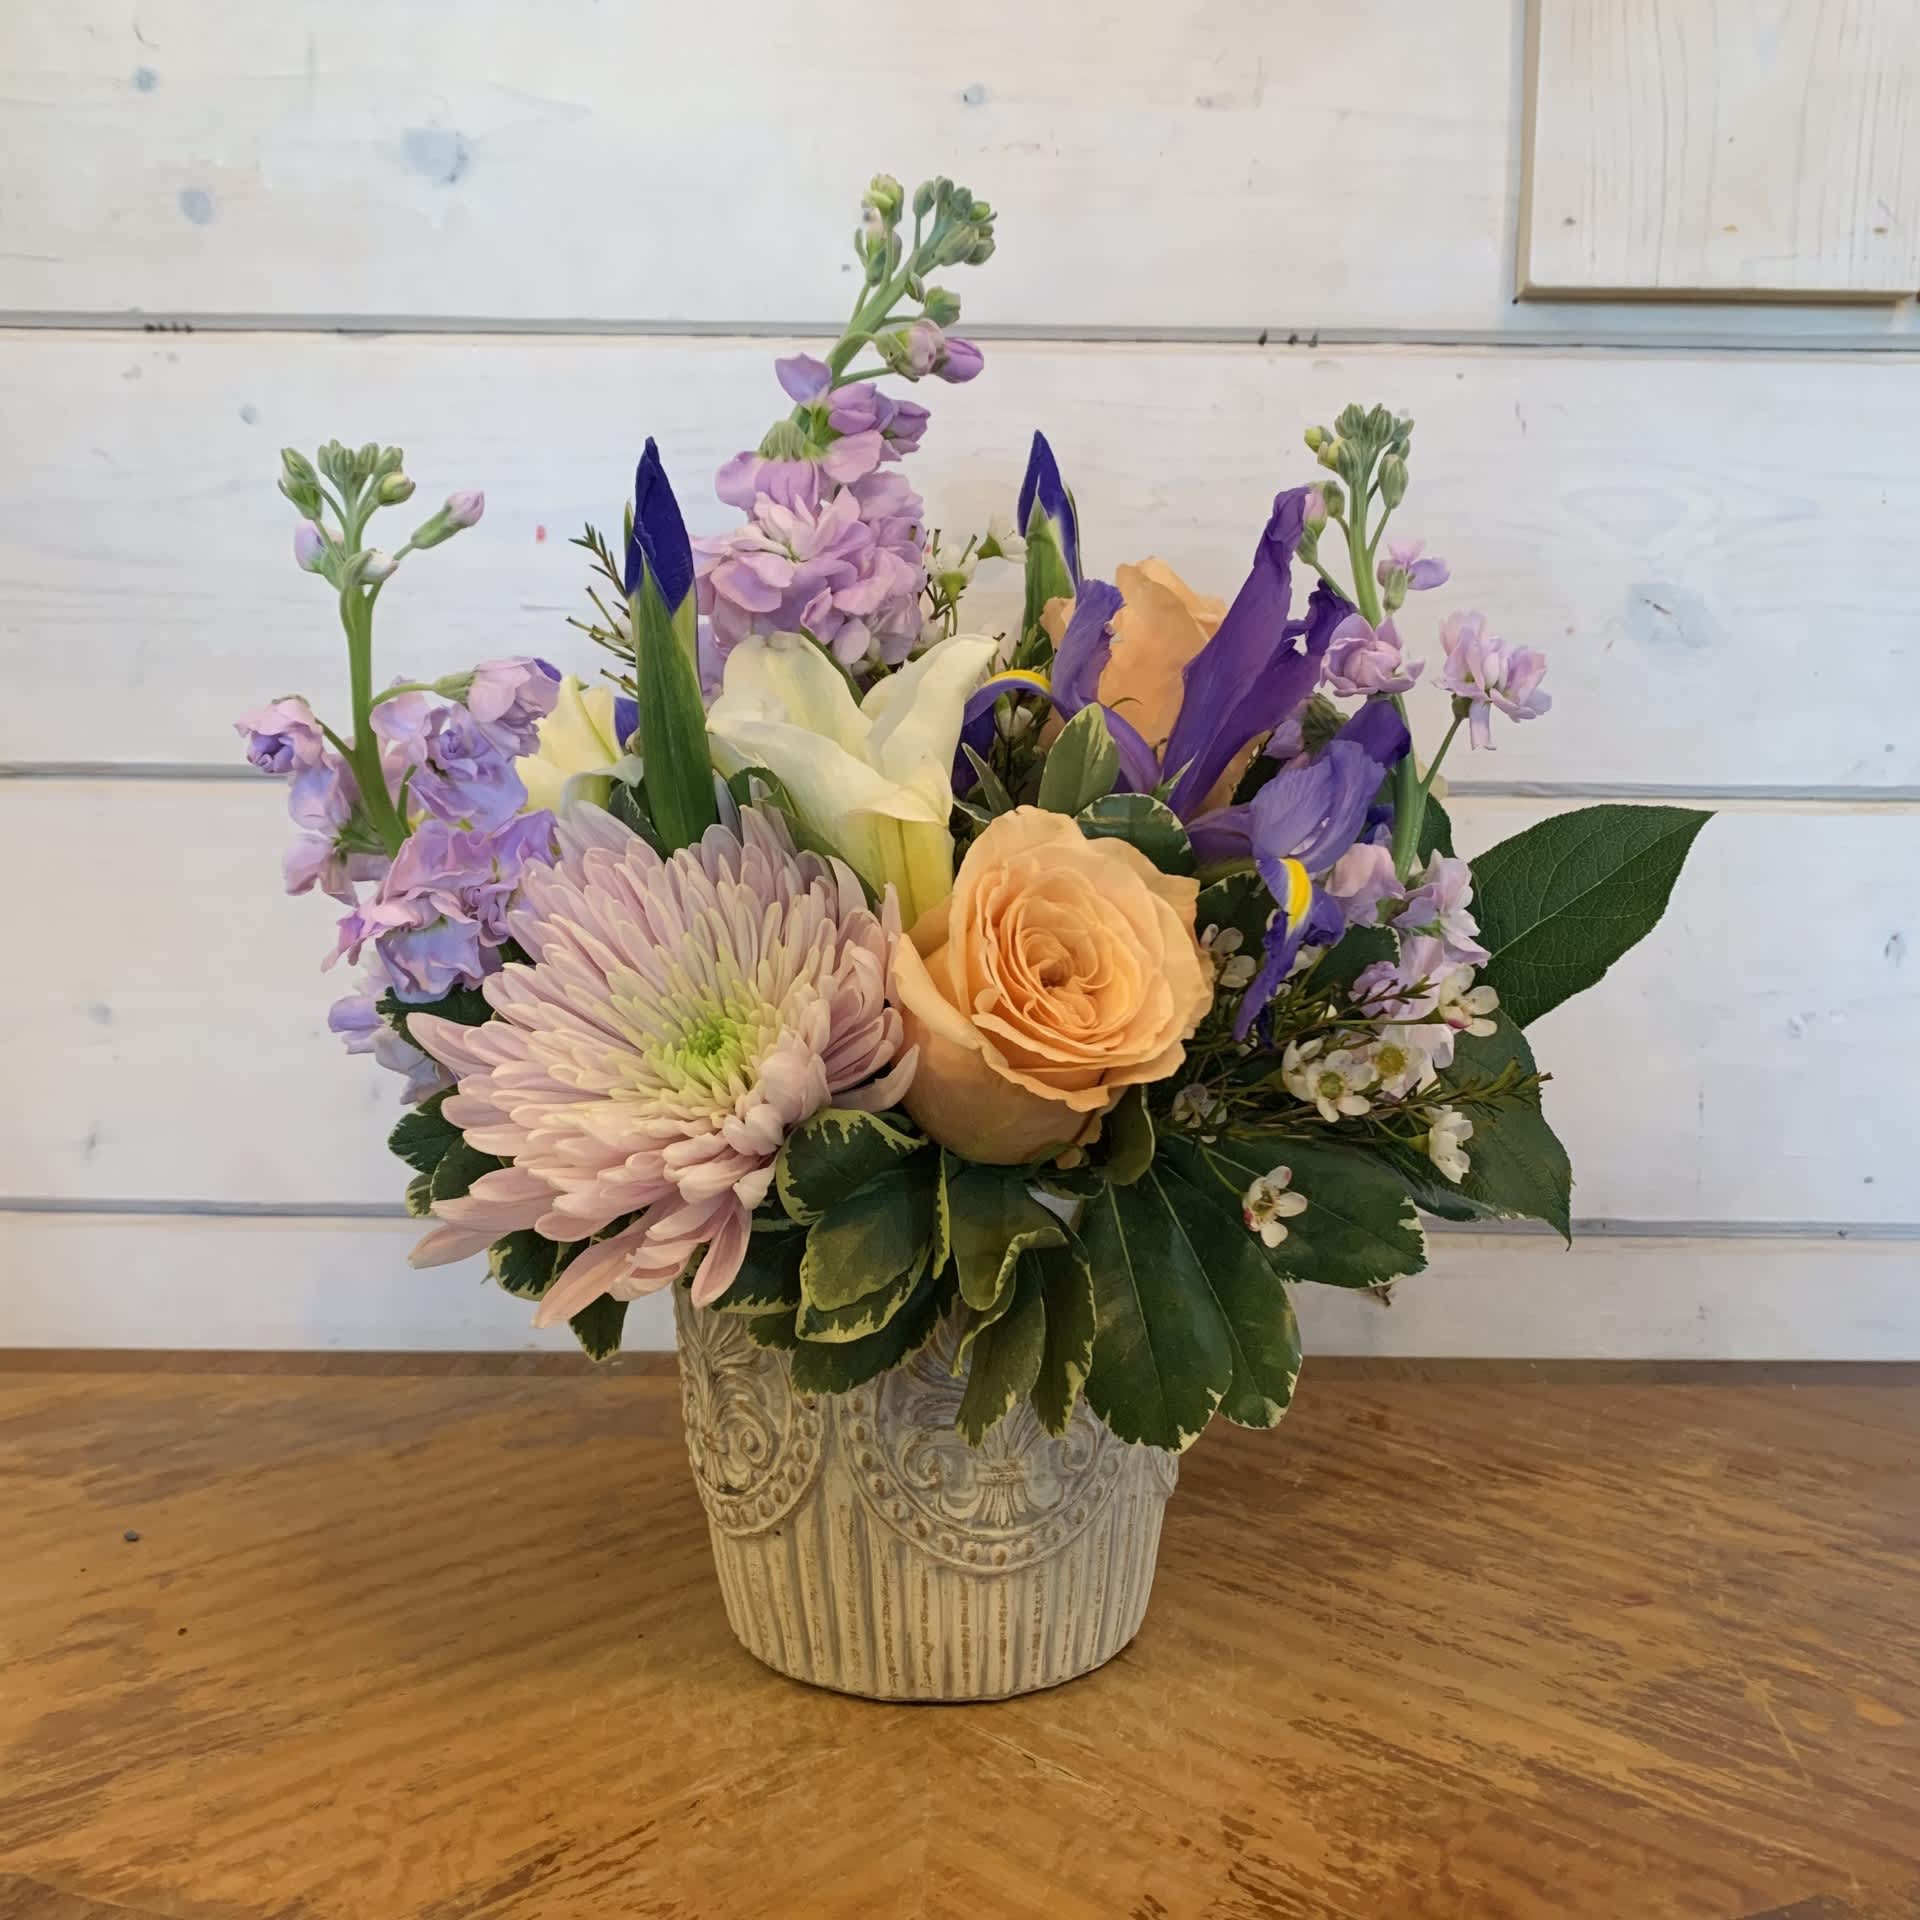 Elegant Spring Bouquet  - Pale apricot roses, lavender stock, white lily, linnet cremon chrysanthemums, and iris arranged in a small medallion pot with seasonal white wax. Standard version is approximately 10in tall and 10in wide. 